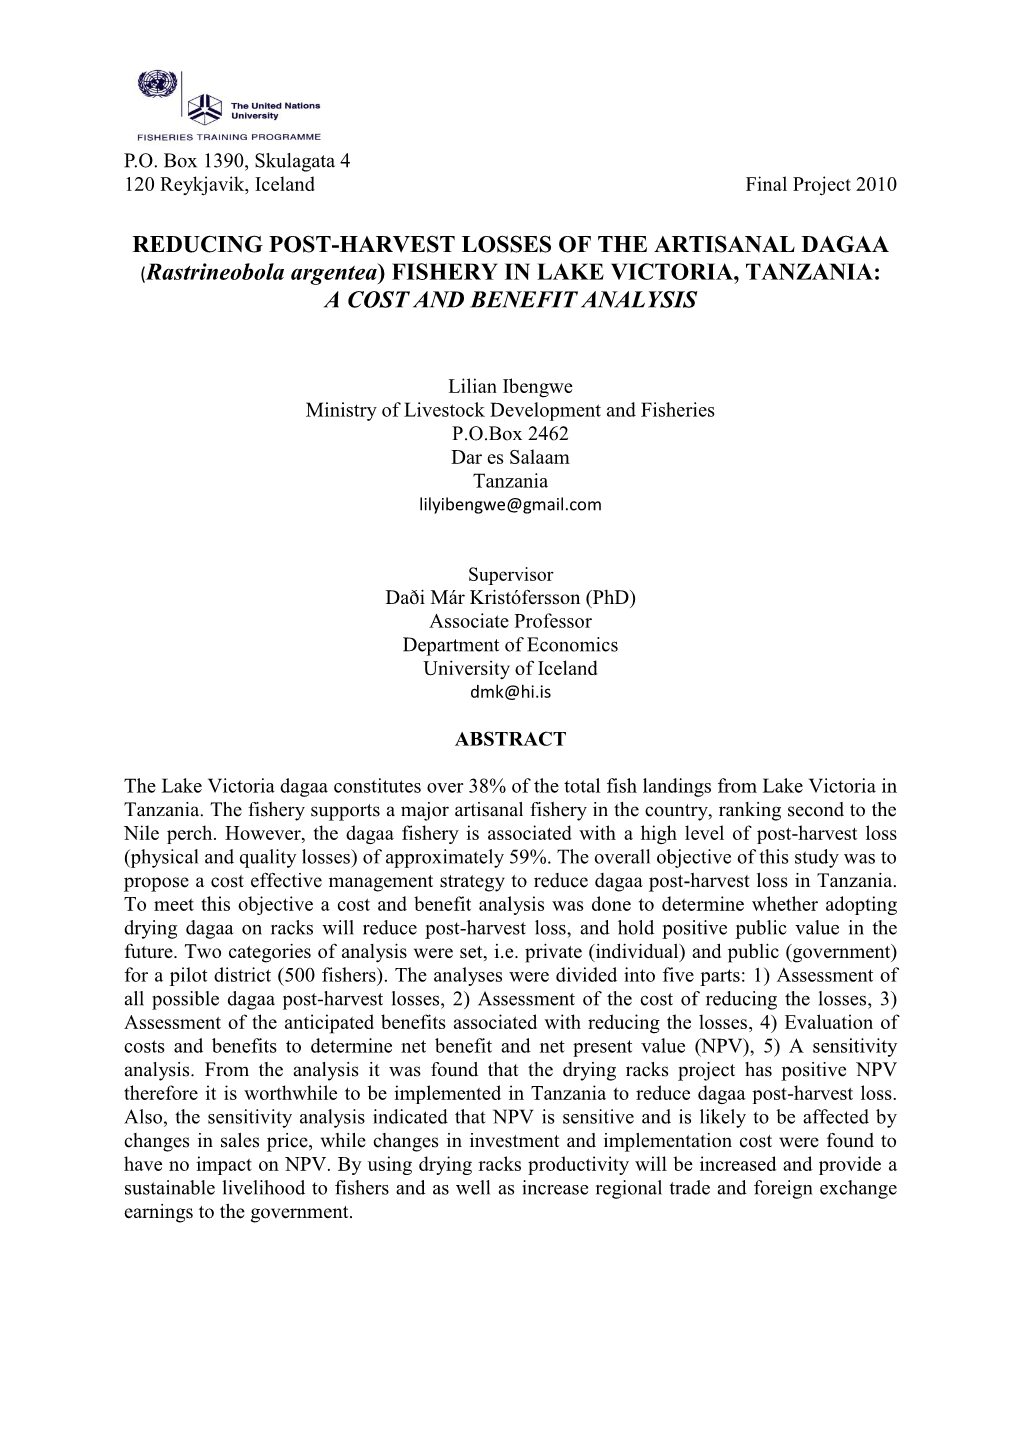 REDUCING POST-HARVEST LOSSES of the ARTISANAL DAGAA (Rastrineobola Argentea) FISHERY in LAKE VICTORIA, TANZANIA: a COST and BENEFIT ANALYSIS